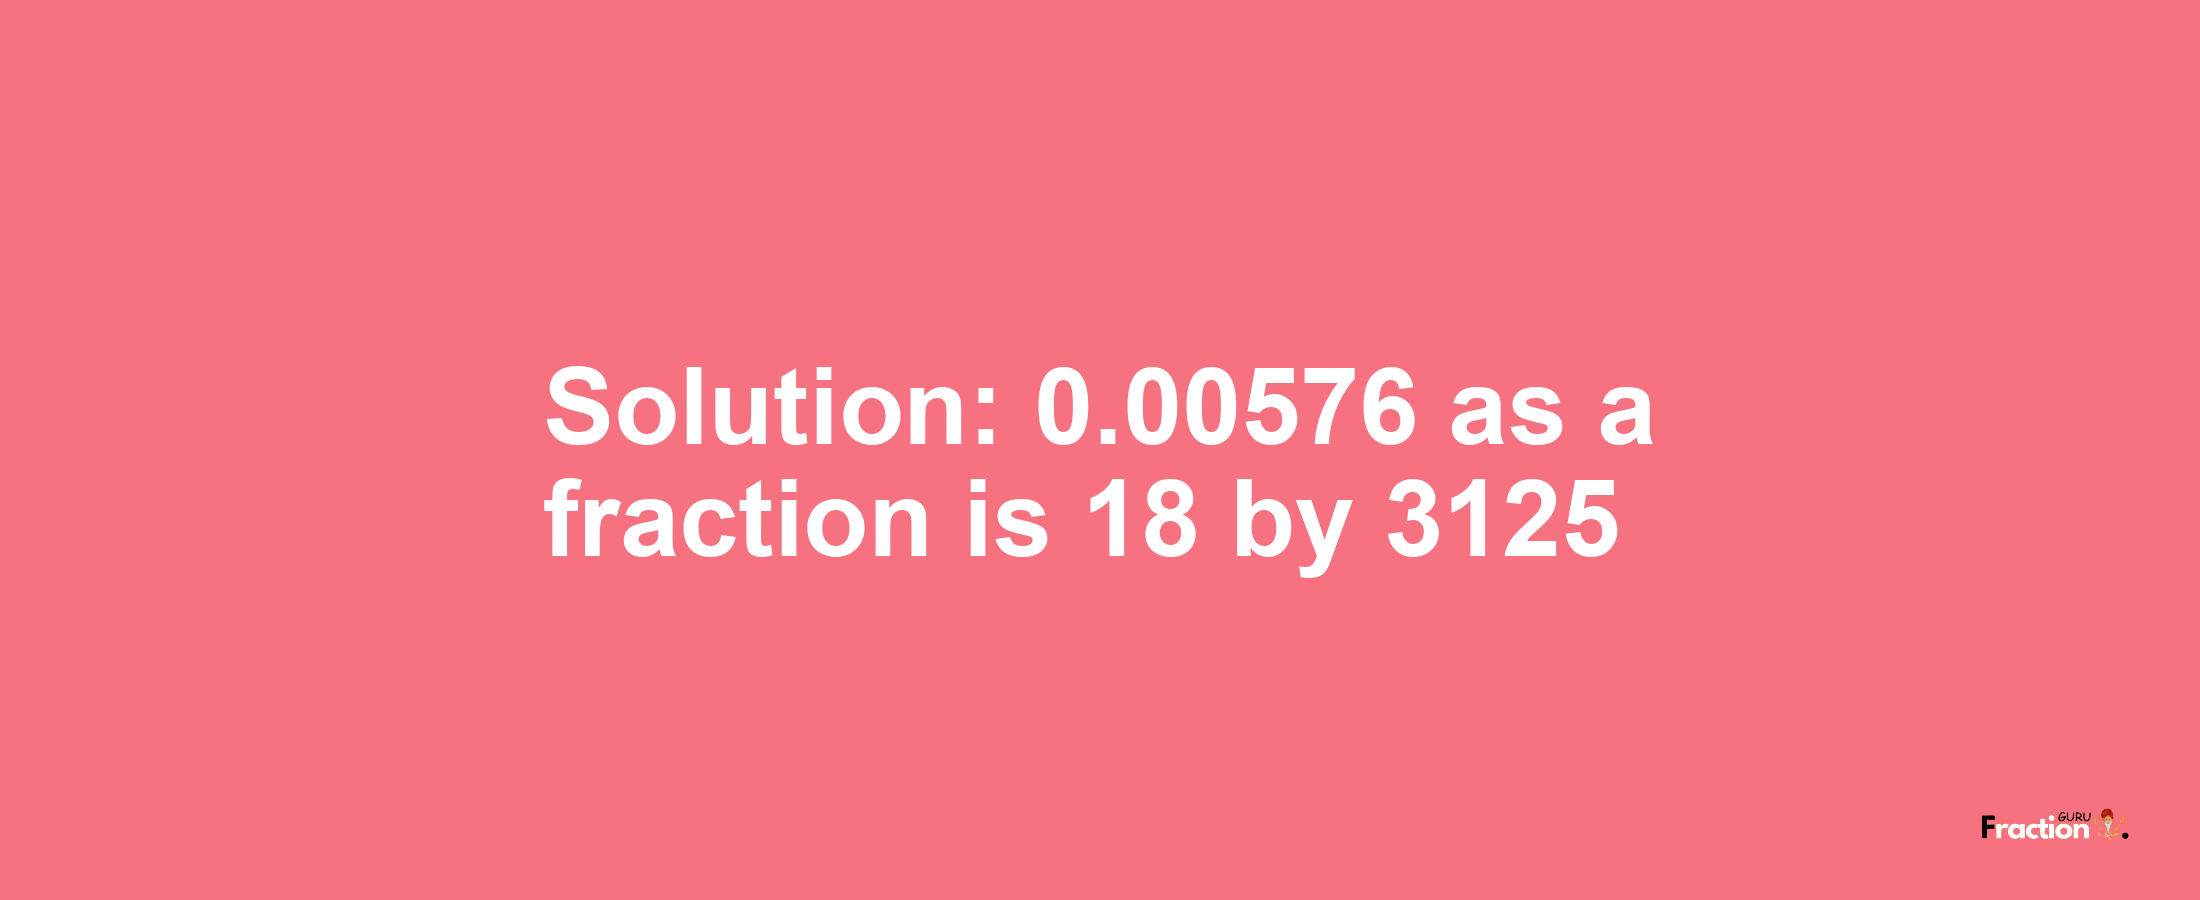 Solution:0.00576 as a fraction is 18/3125